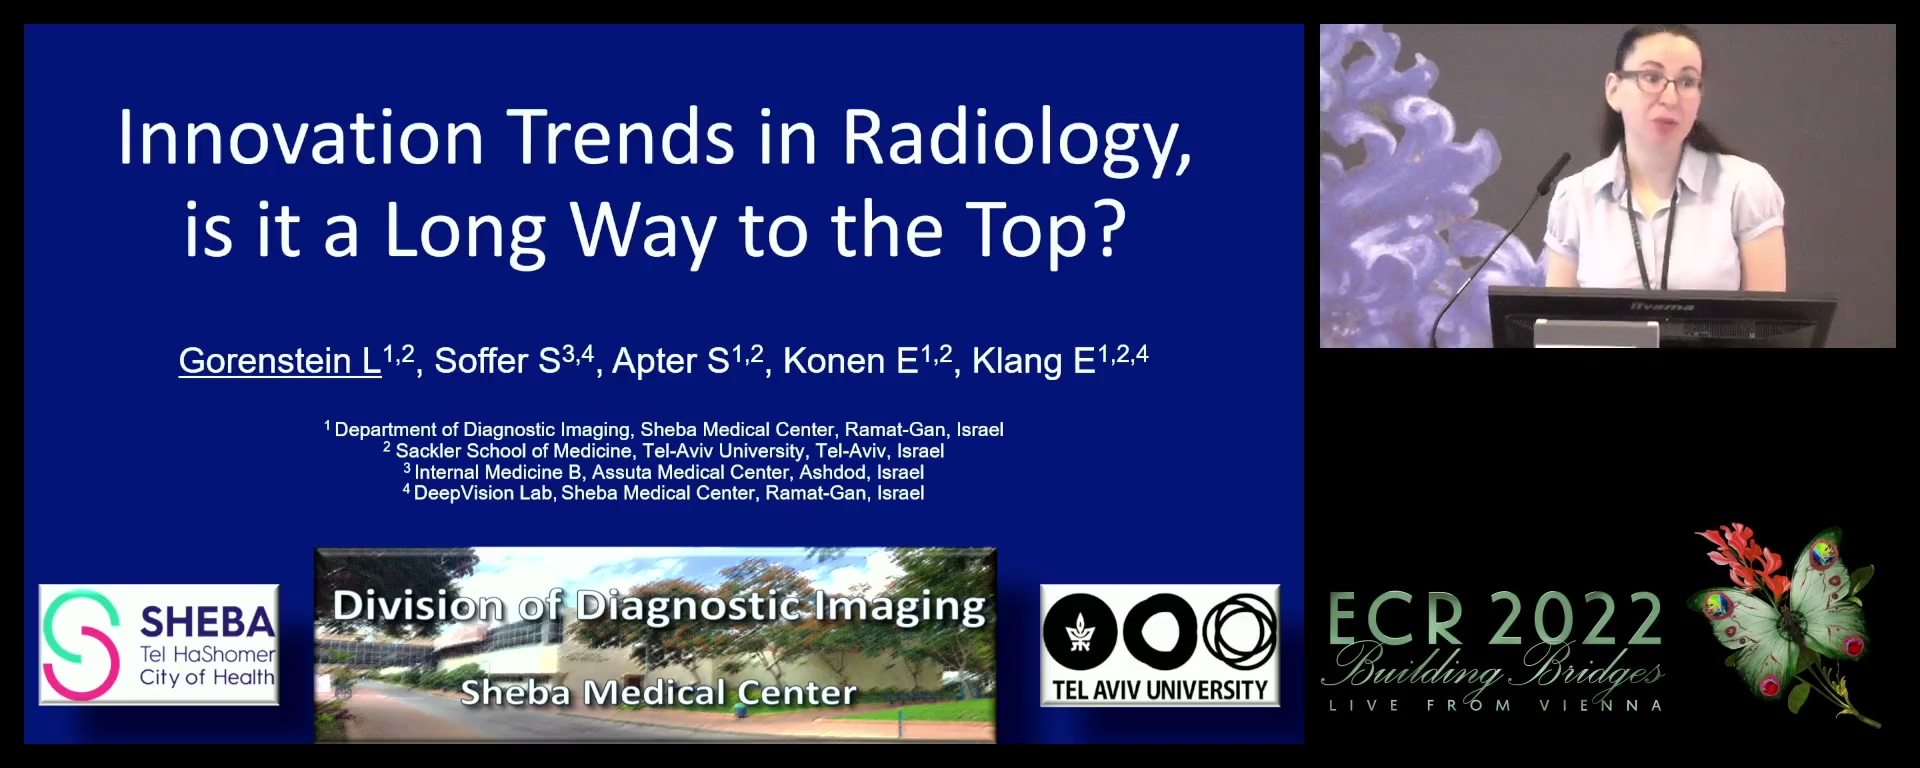 Innovation trends in radiology: is it a long way to the top? - Larisa Gorenstein, Ramat Gan / IL